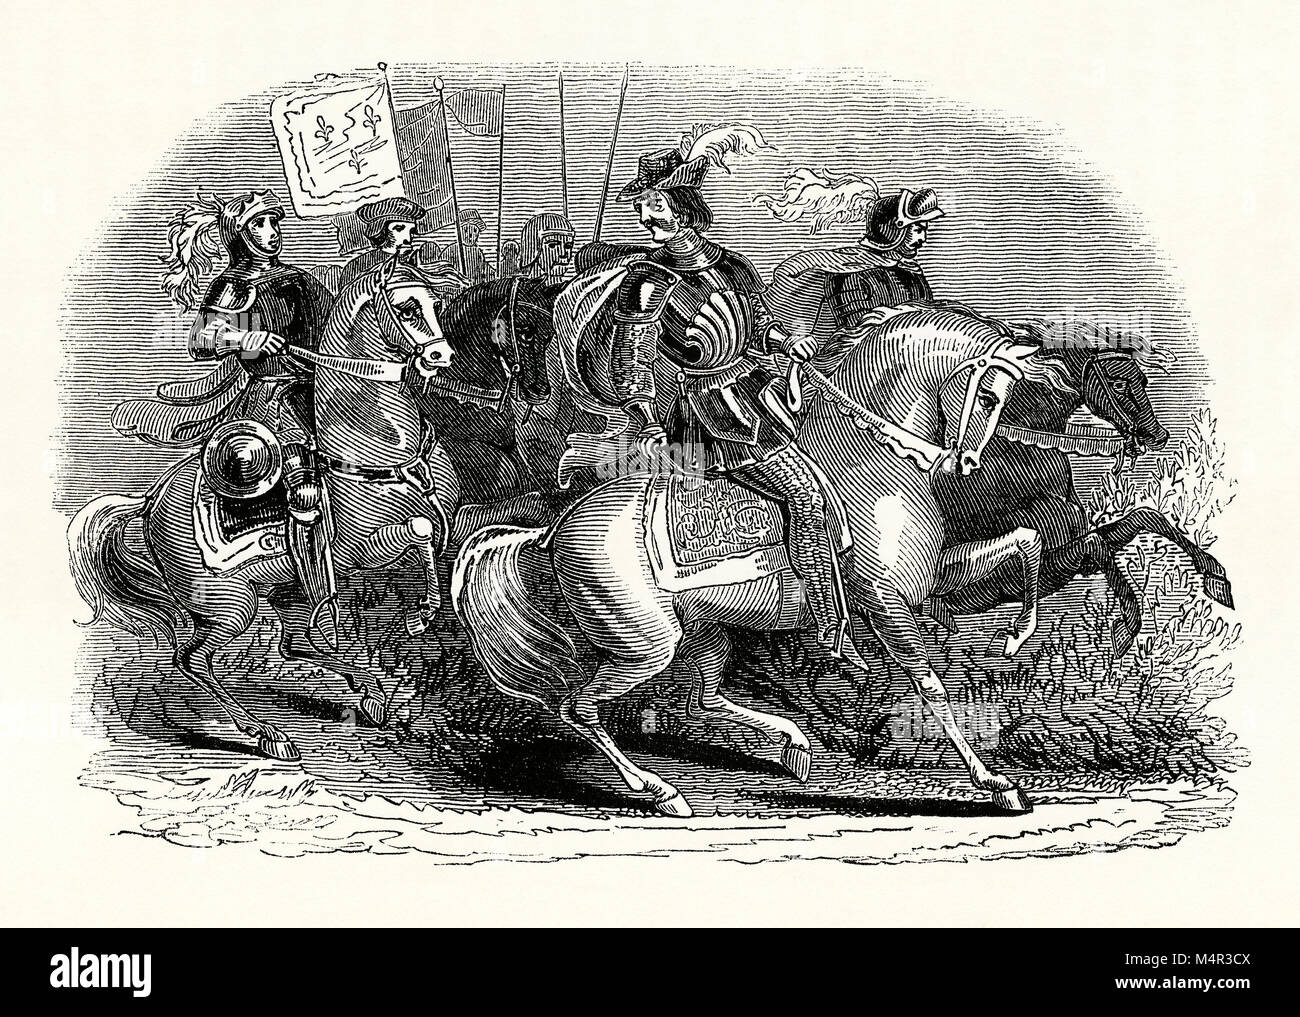 An old engraving of 'Free Company' horsemen c.1300. A free company was also known as 'great company' or 'grande companie' and in France they were routiers and écorcheurs. It was an army of mercenaries between the 12th and 14th centuries recruited by private employers during wars. They acted independently of any government and so were 'free'. They were active mainly in France. The White Company of John Hawkwood, probably the most famous free company, was active in Italy in the late 14th century. Stock Photo